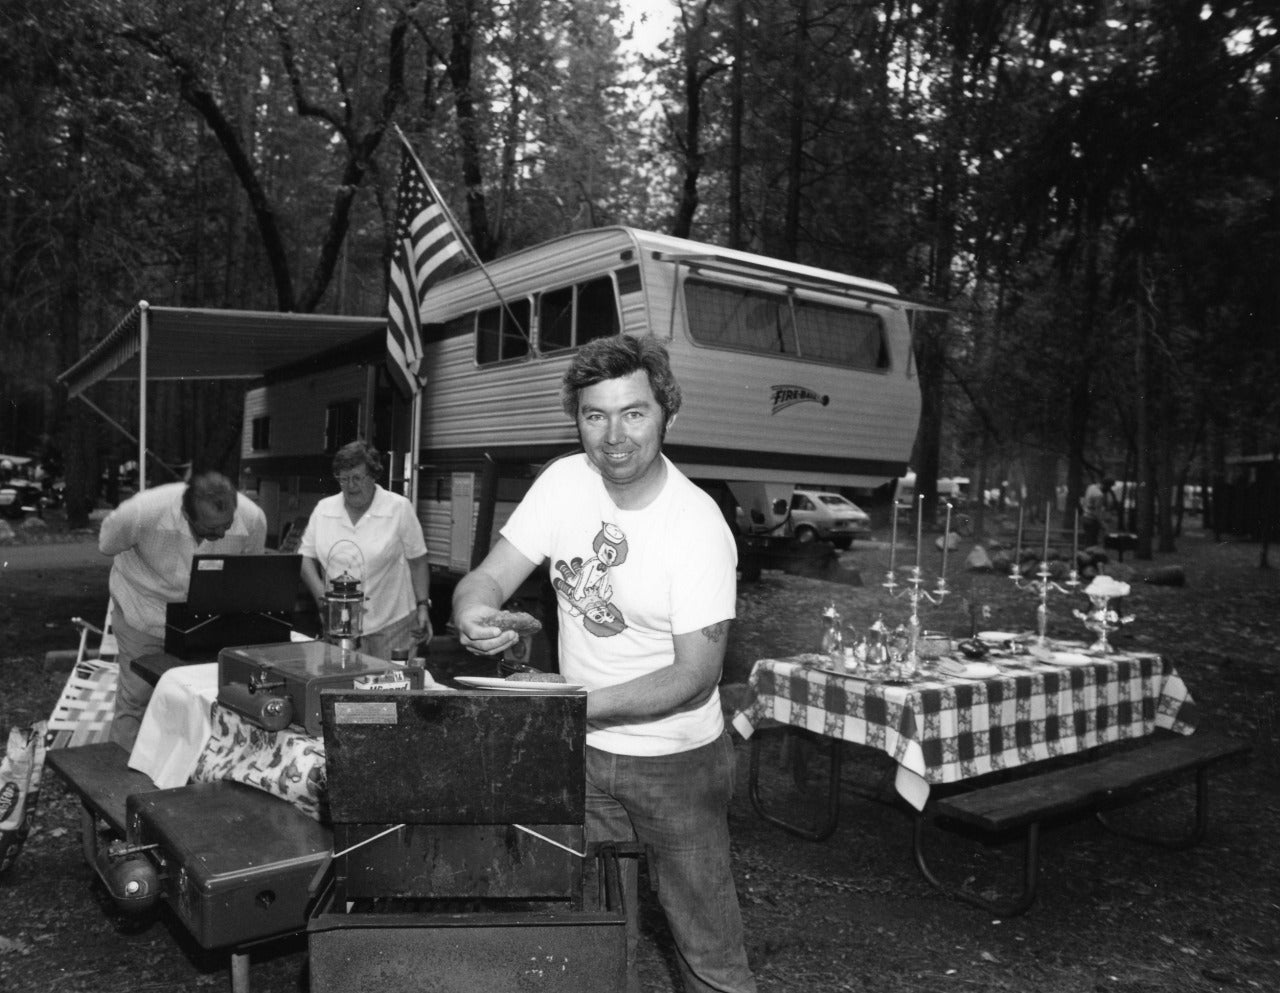 Bill Owens Black and White Photograph - Every summer we go all out on our camp in Yosemite, from Leisure